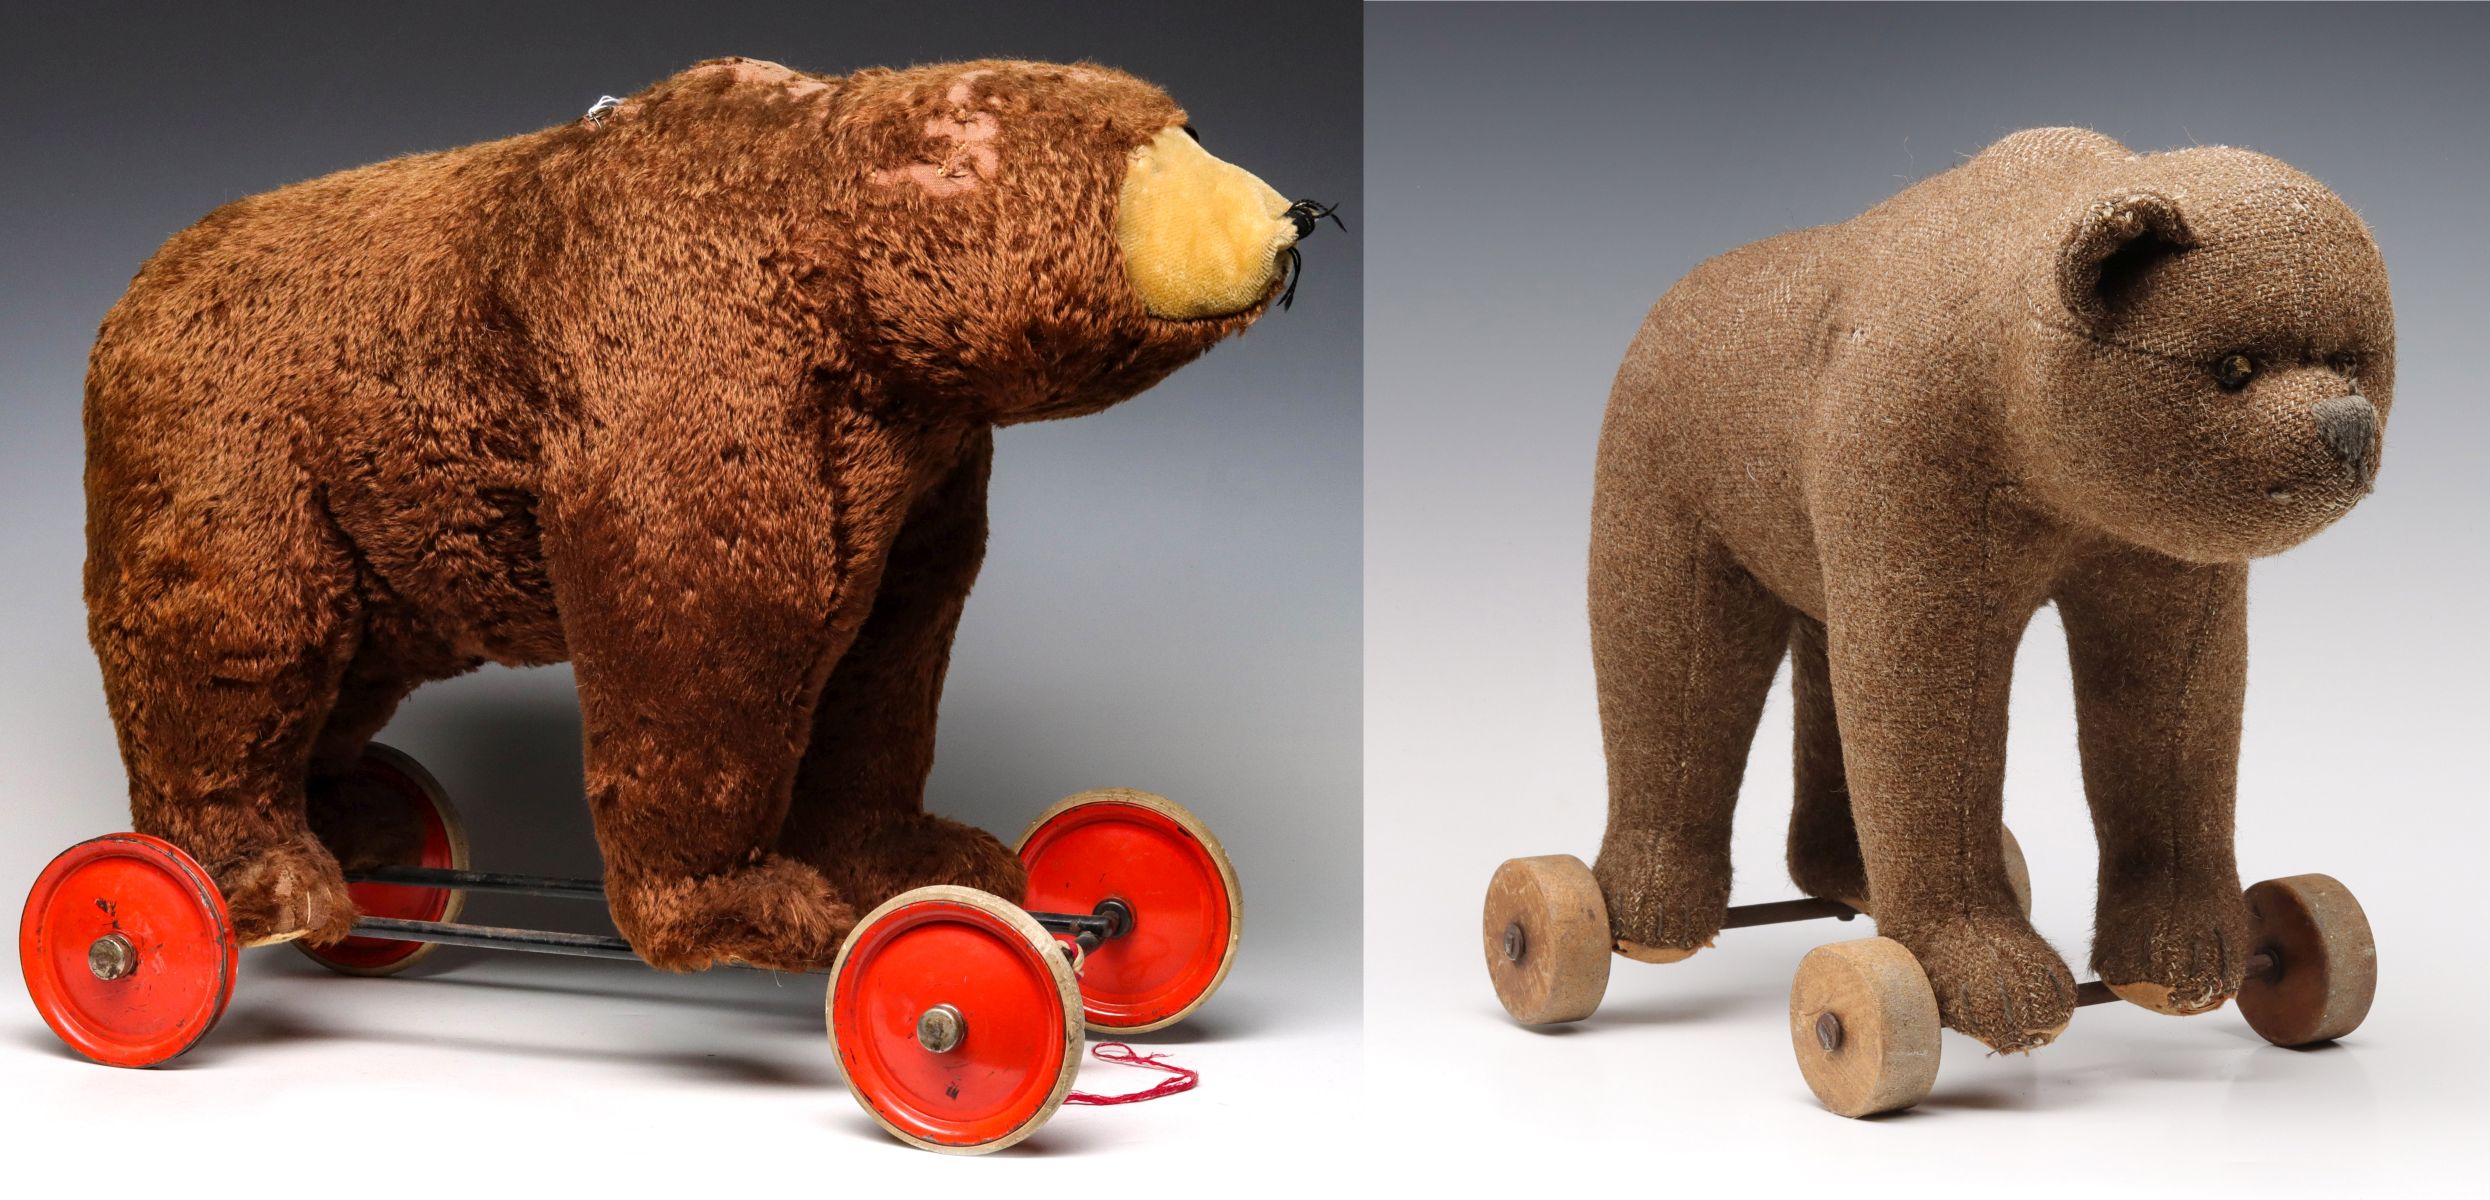 TWO VINTAGE BEARS ON WHEELS ATTRIBUTED TO STEIFF